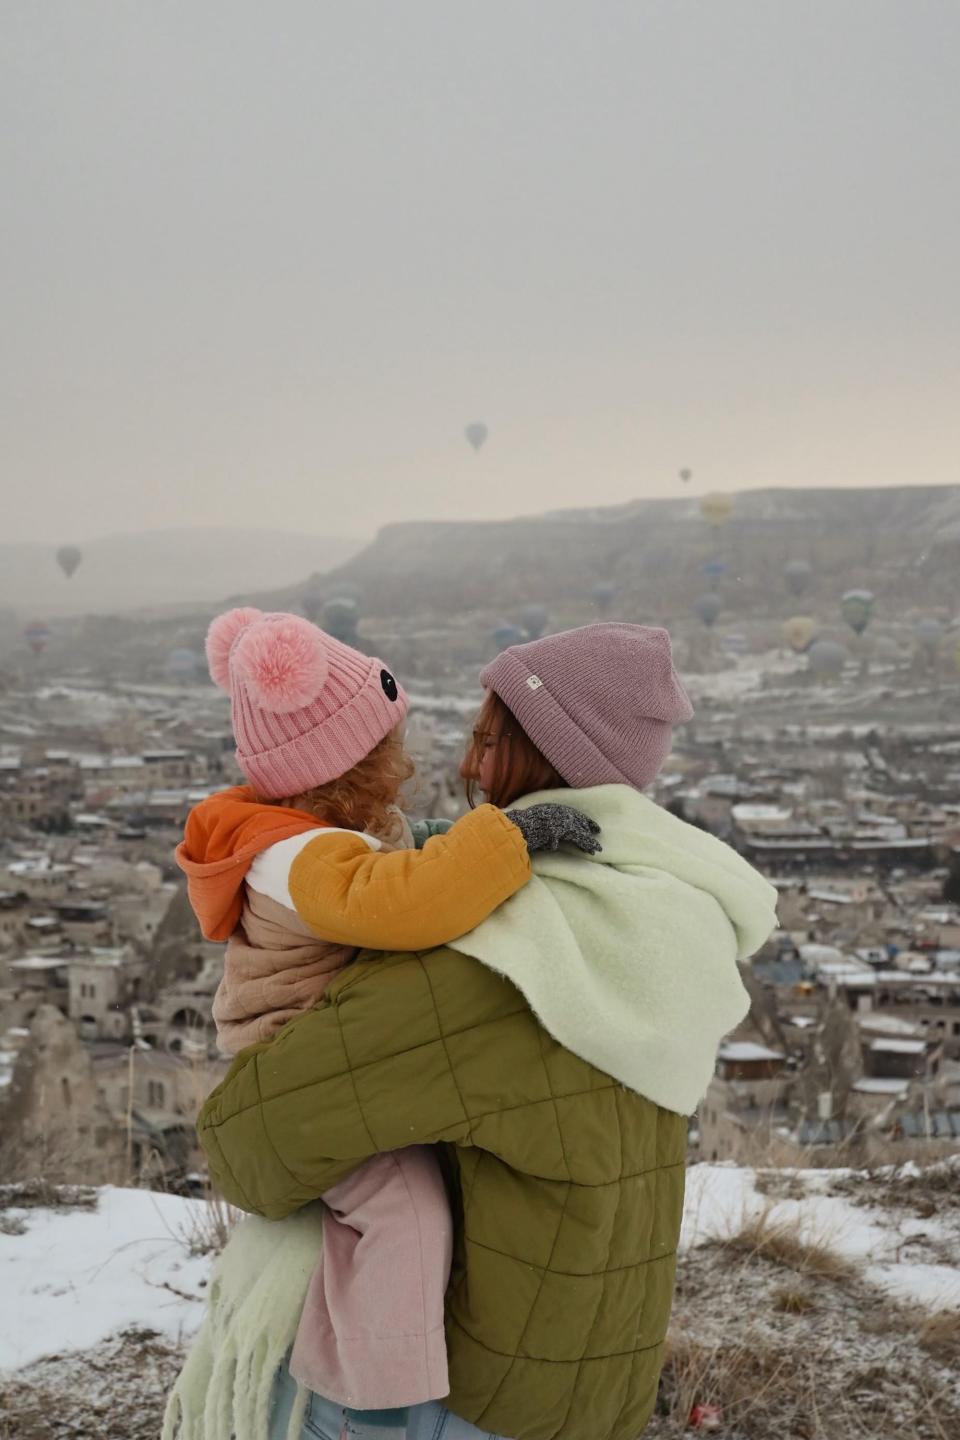 A daughter looks at her mother in front of a city with hot air balloons floating over it.